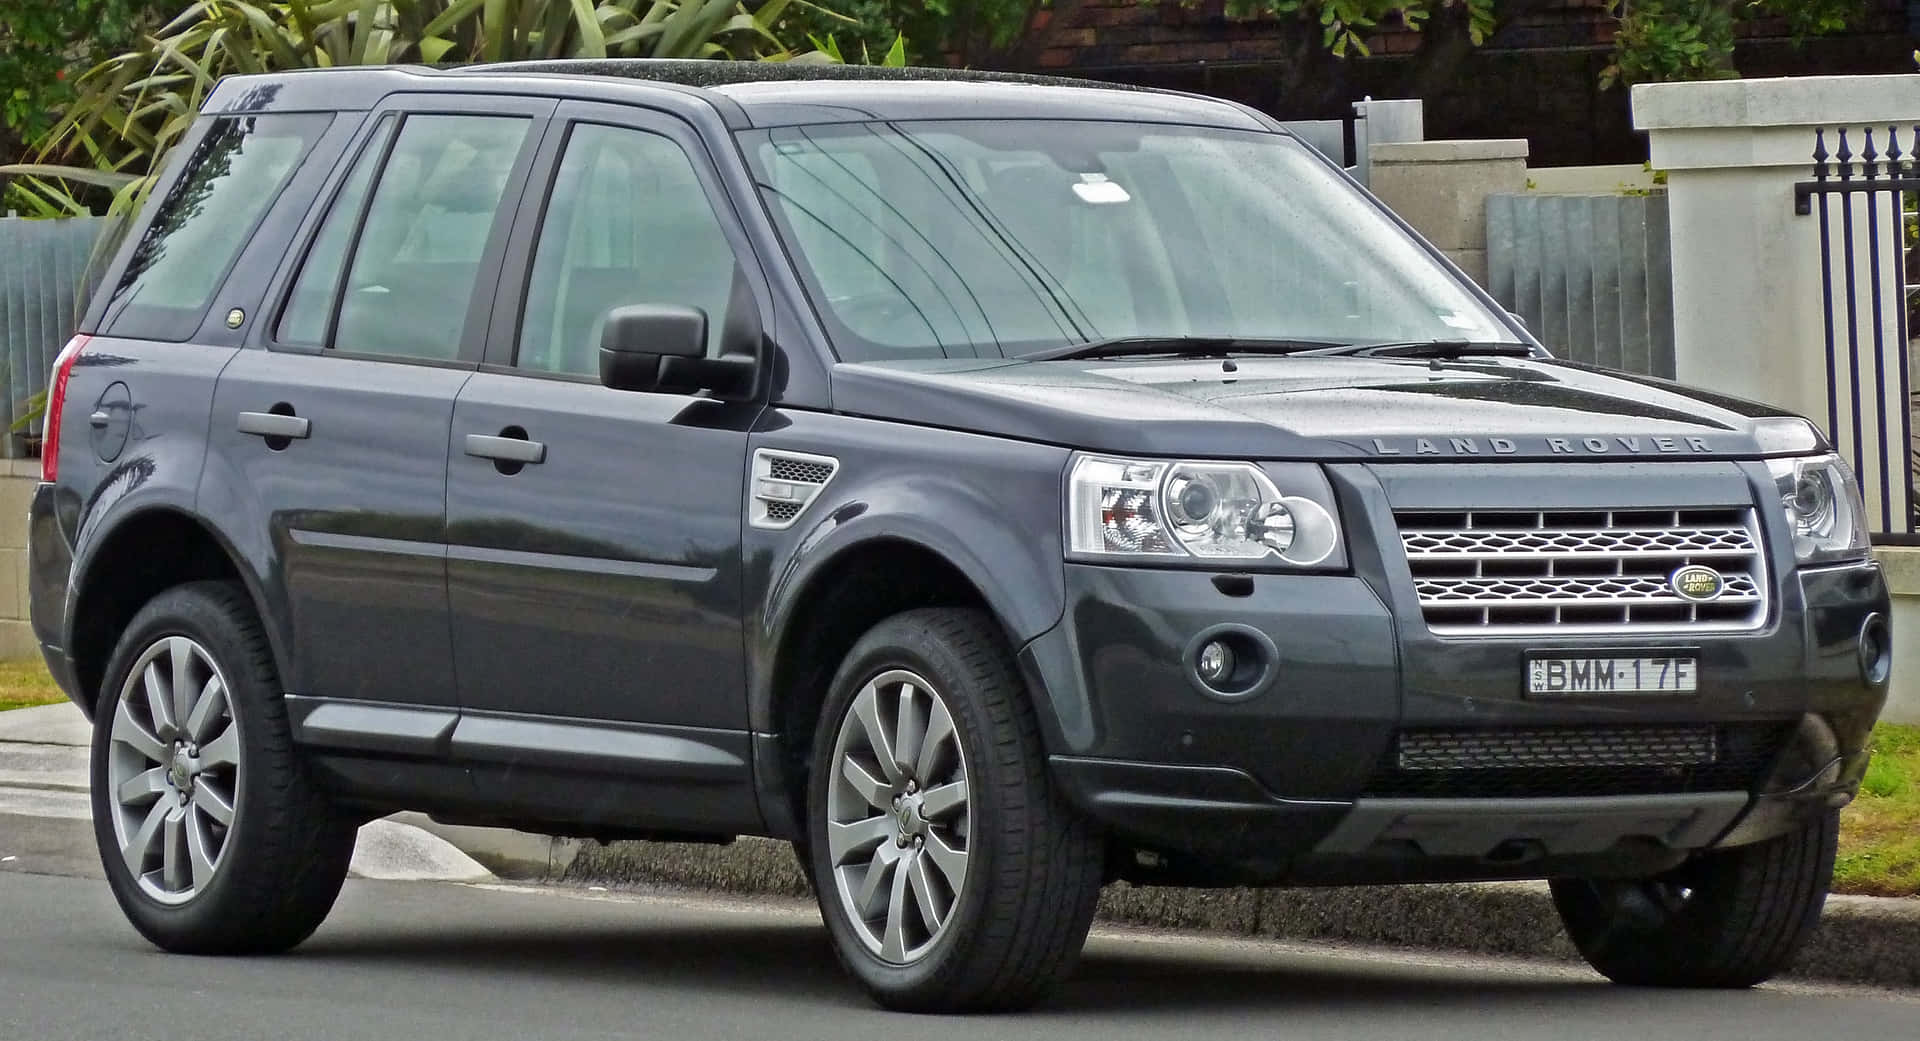 Land Rover Freelander in a stunning off-road setting Wallpaper